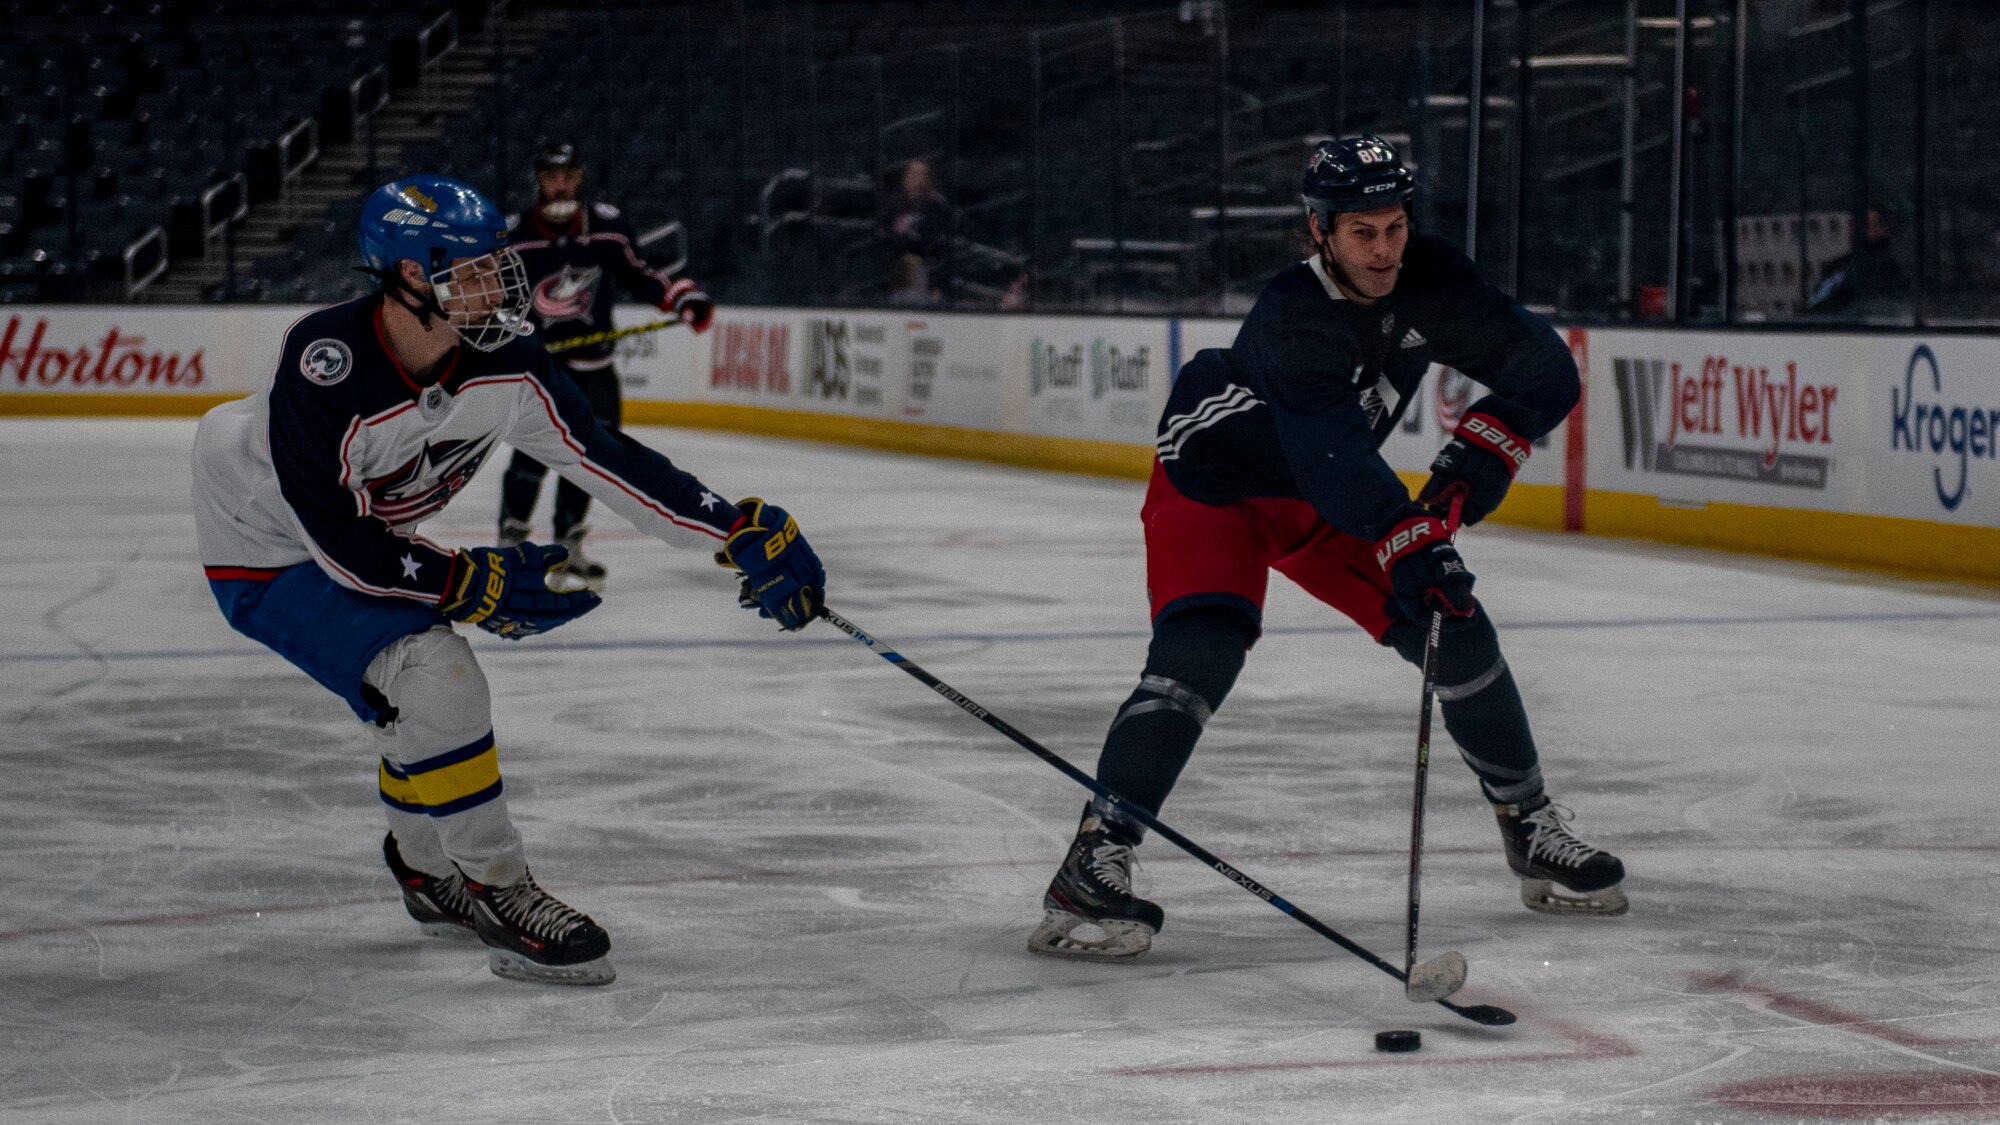 Sam Medvec (left) plays defense against former Columbus Blue Jackets winger Chris Clark during the Military Appreciation Night alumni game April 7, 2022, at Nationwide Arena, Columbus, Ohio. The friendly exhibition featured former Blue Jackets players and the Wright Flyers, a recreation team made up of military and civilian personnel from Wright-Patterson Air Force Base, prior to Columbus’s game against the Philadelphia Flyers. (U.S. Air Force photo by Senior Airman Jack Gardner)